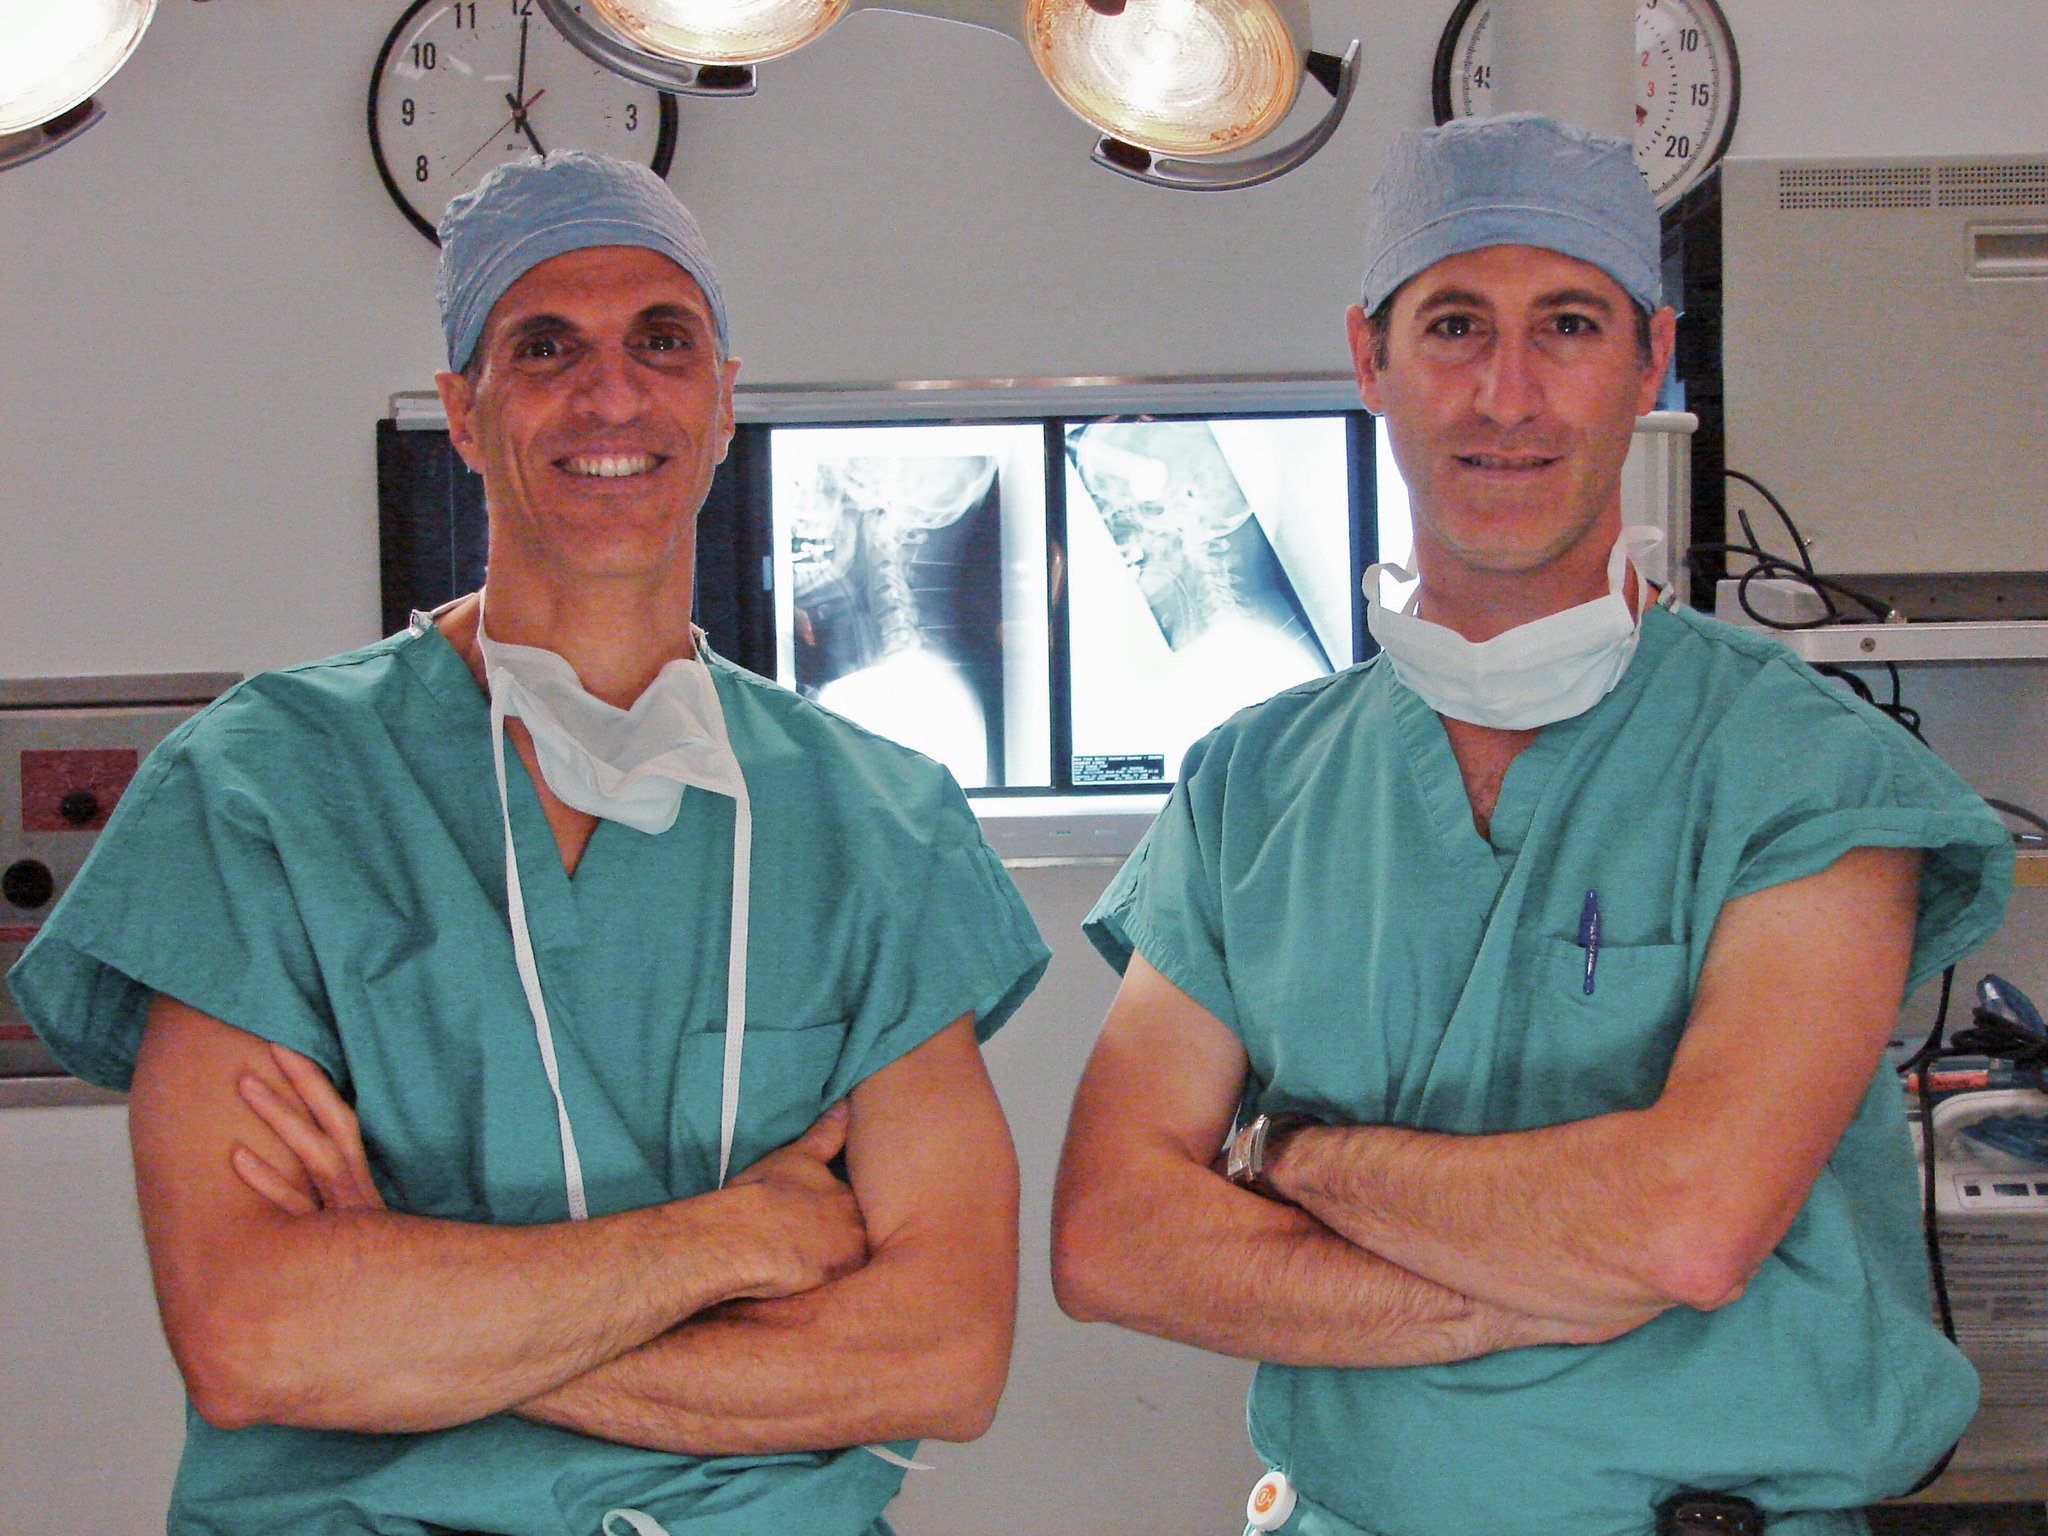 Dr. Souweidane and Dr. Greenfield - Weill Cornell Medicine